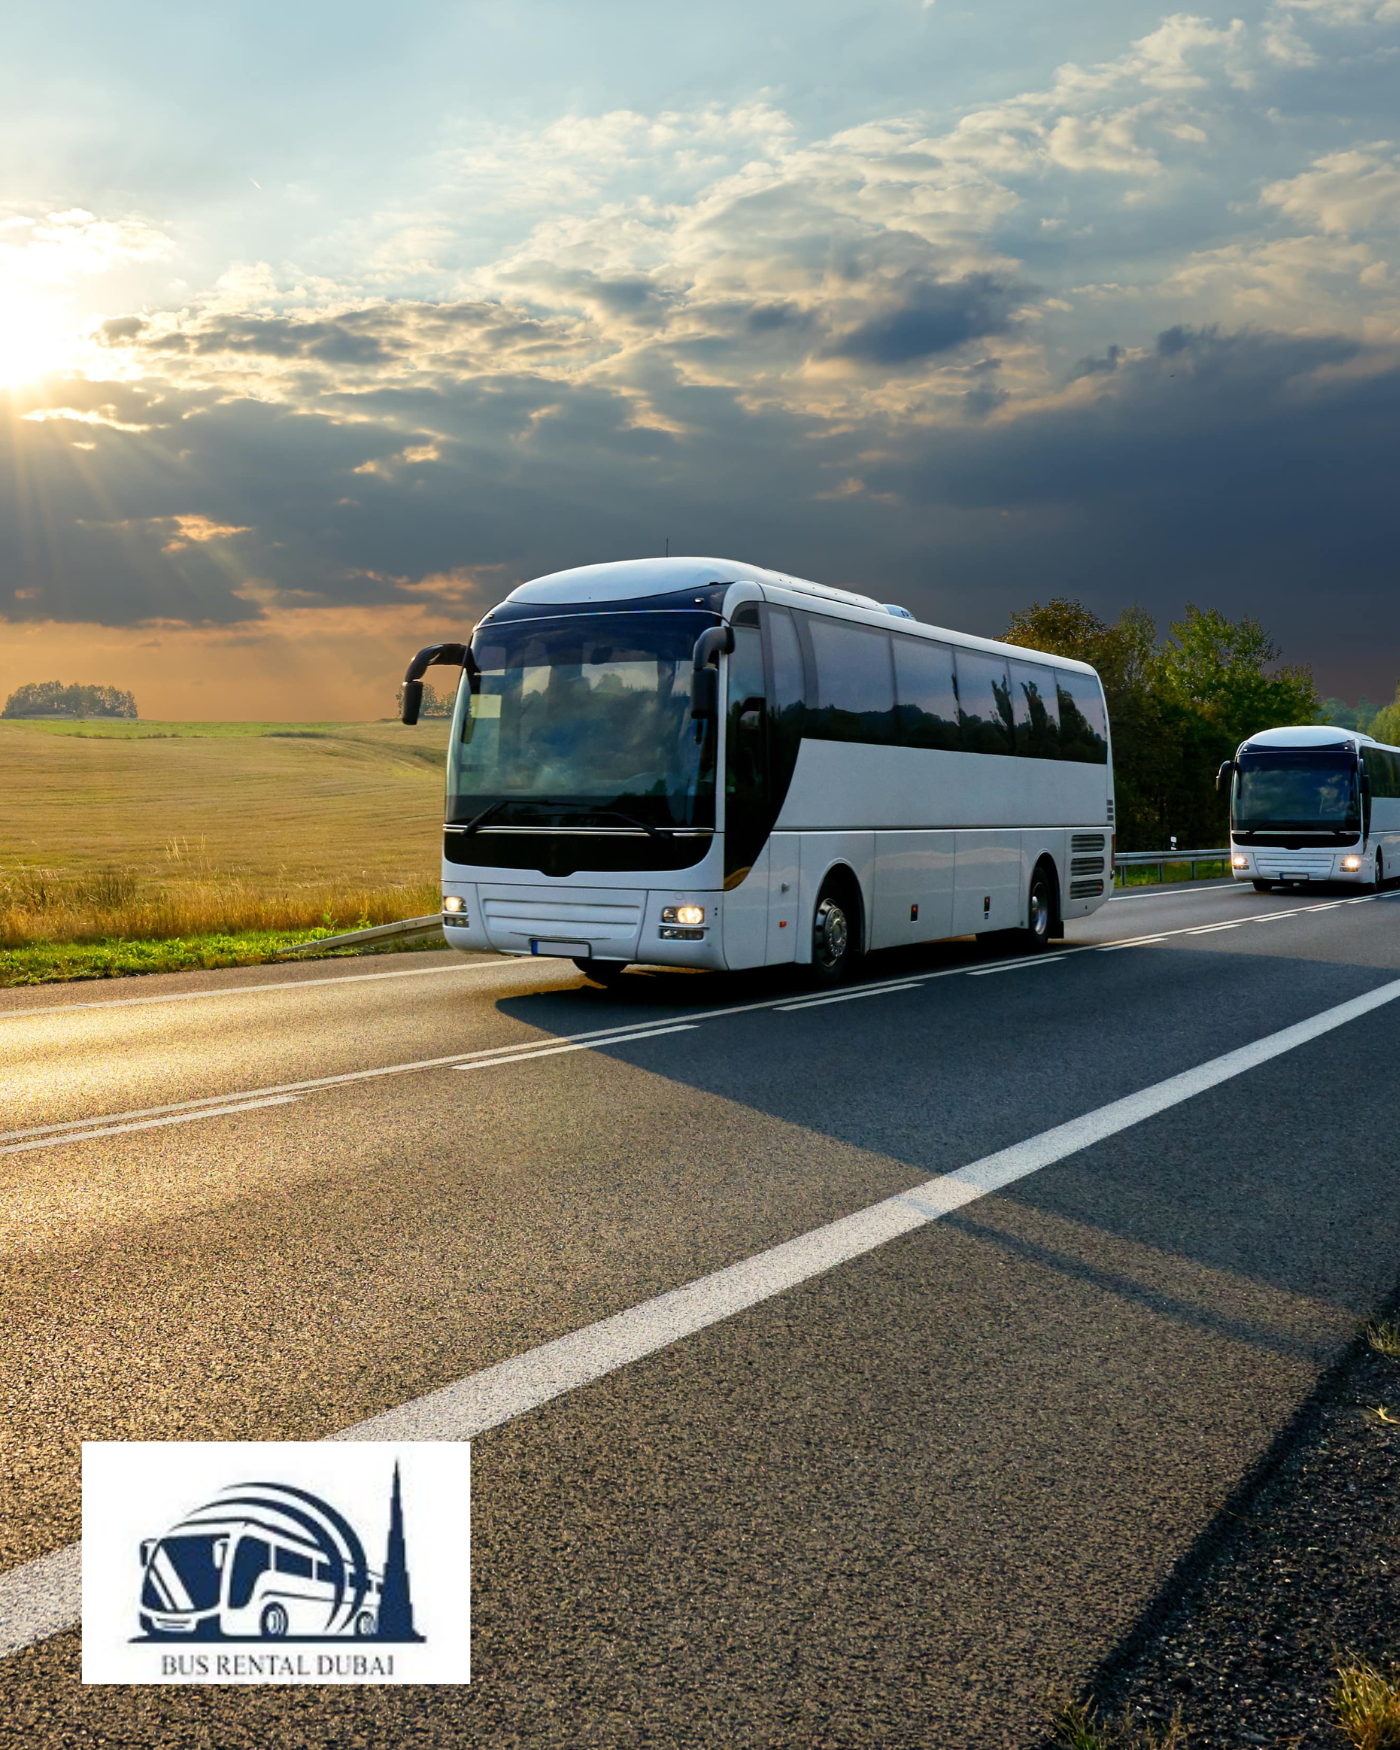 Premium Bus Rental Dubai With Driver - Experience Comfort and Convenience